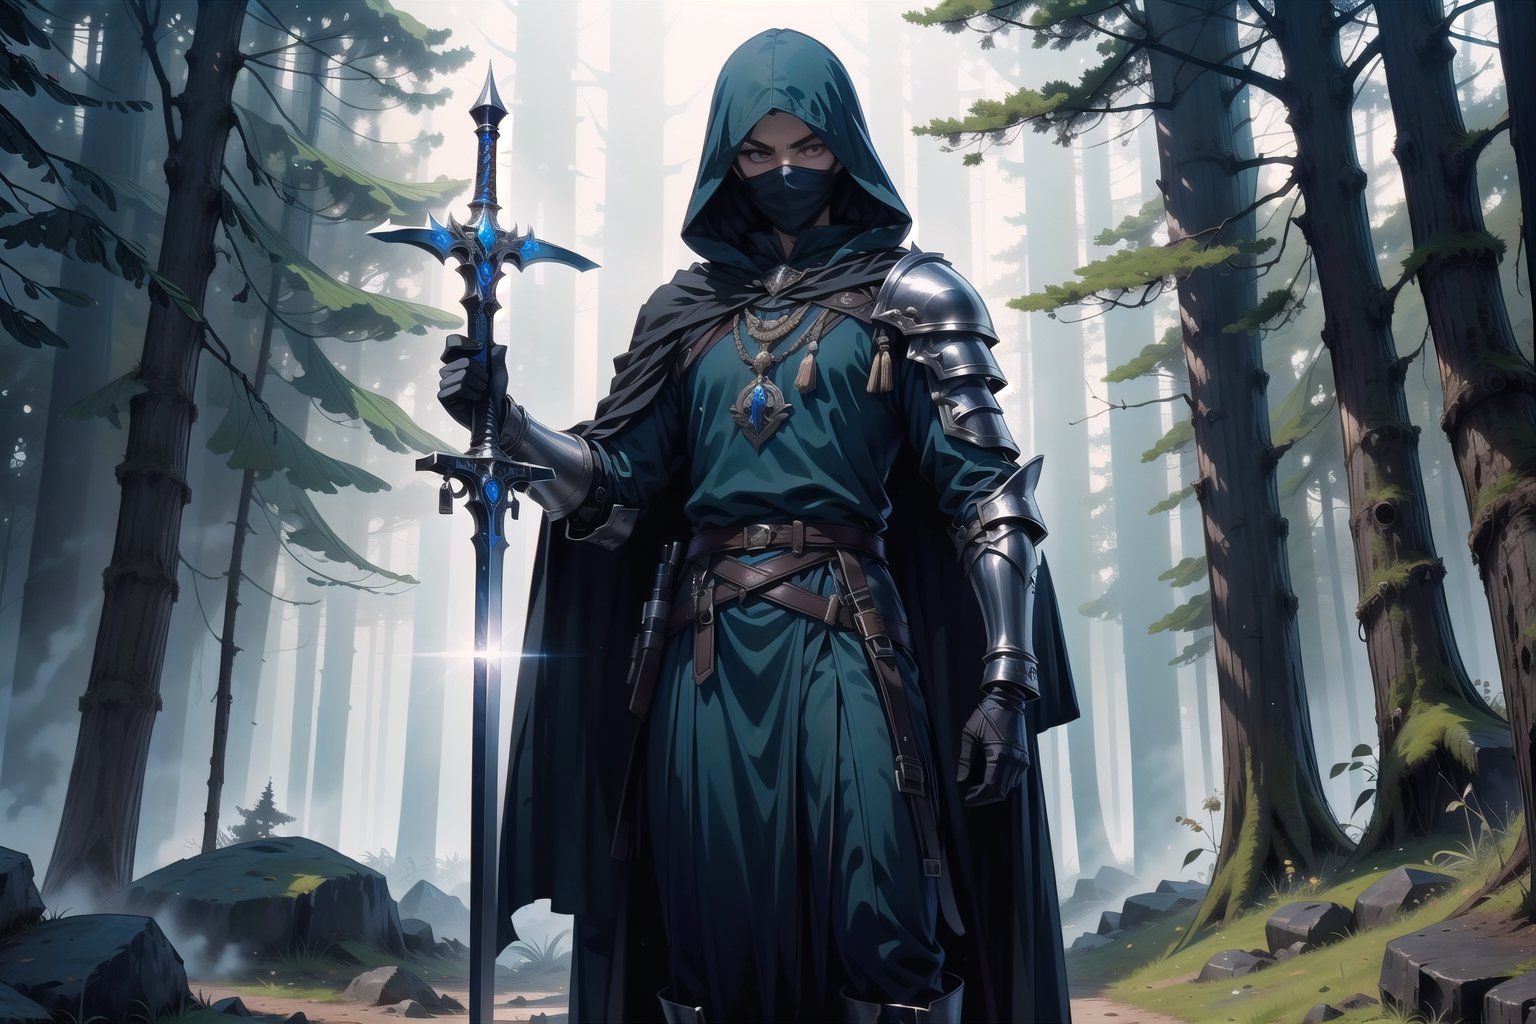 solo, 1assassin, holding, standing, weapon, male focus, without a face, outdoors, sword, hood, cape, full black face, holding weapon, armor, tree, holding sword, gauntlets, nature, scenery, cloak, hood up, forest, rock,Dark fantasy v2